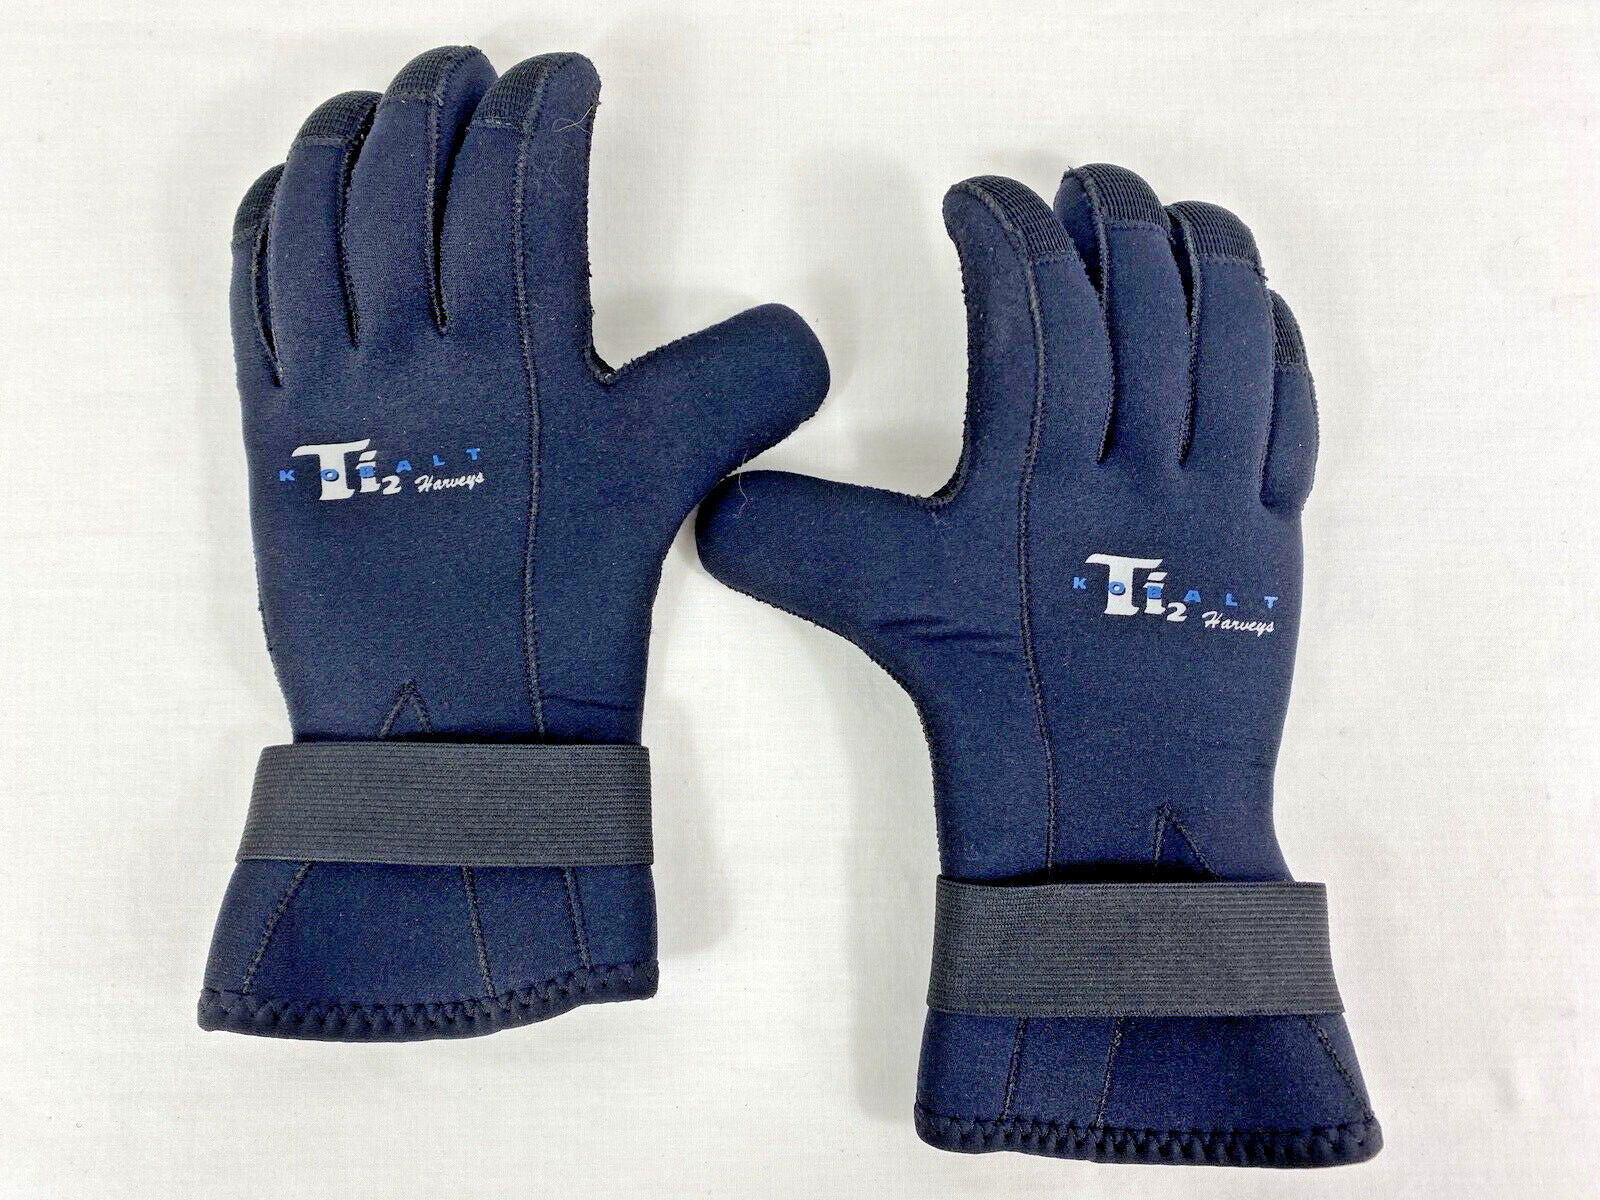 Primary image for NEW Harvey’s Ti2 & Flex Wetsuit Diving Gloves - Men’s Sz Small - NWOT - L@@K !!!